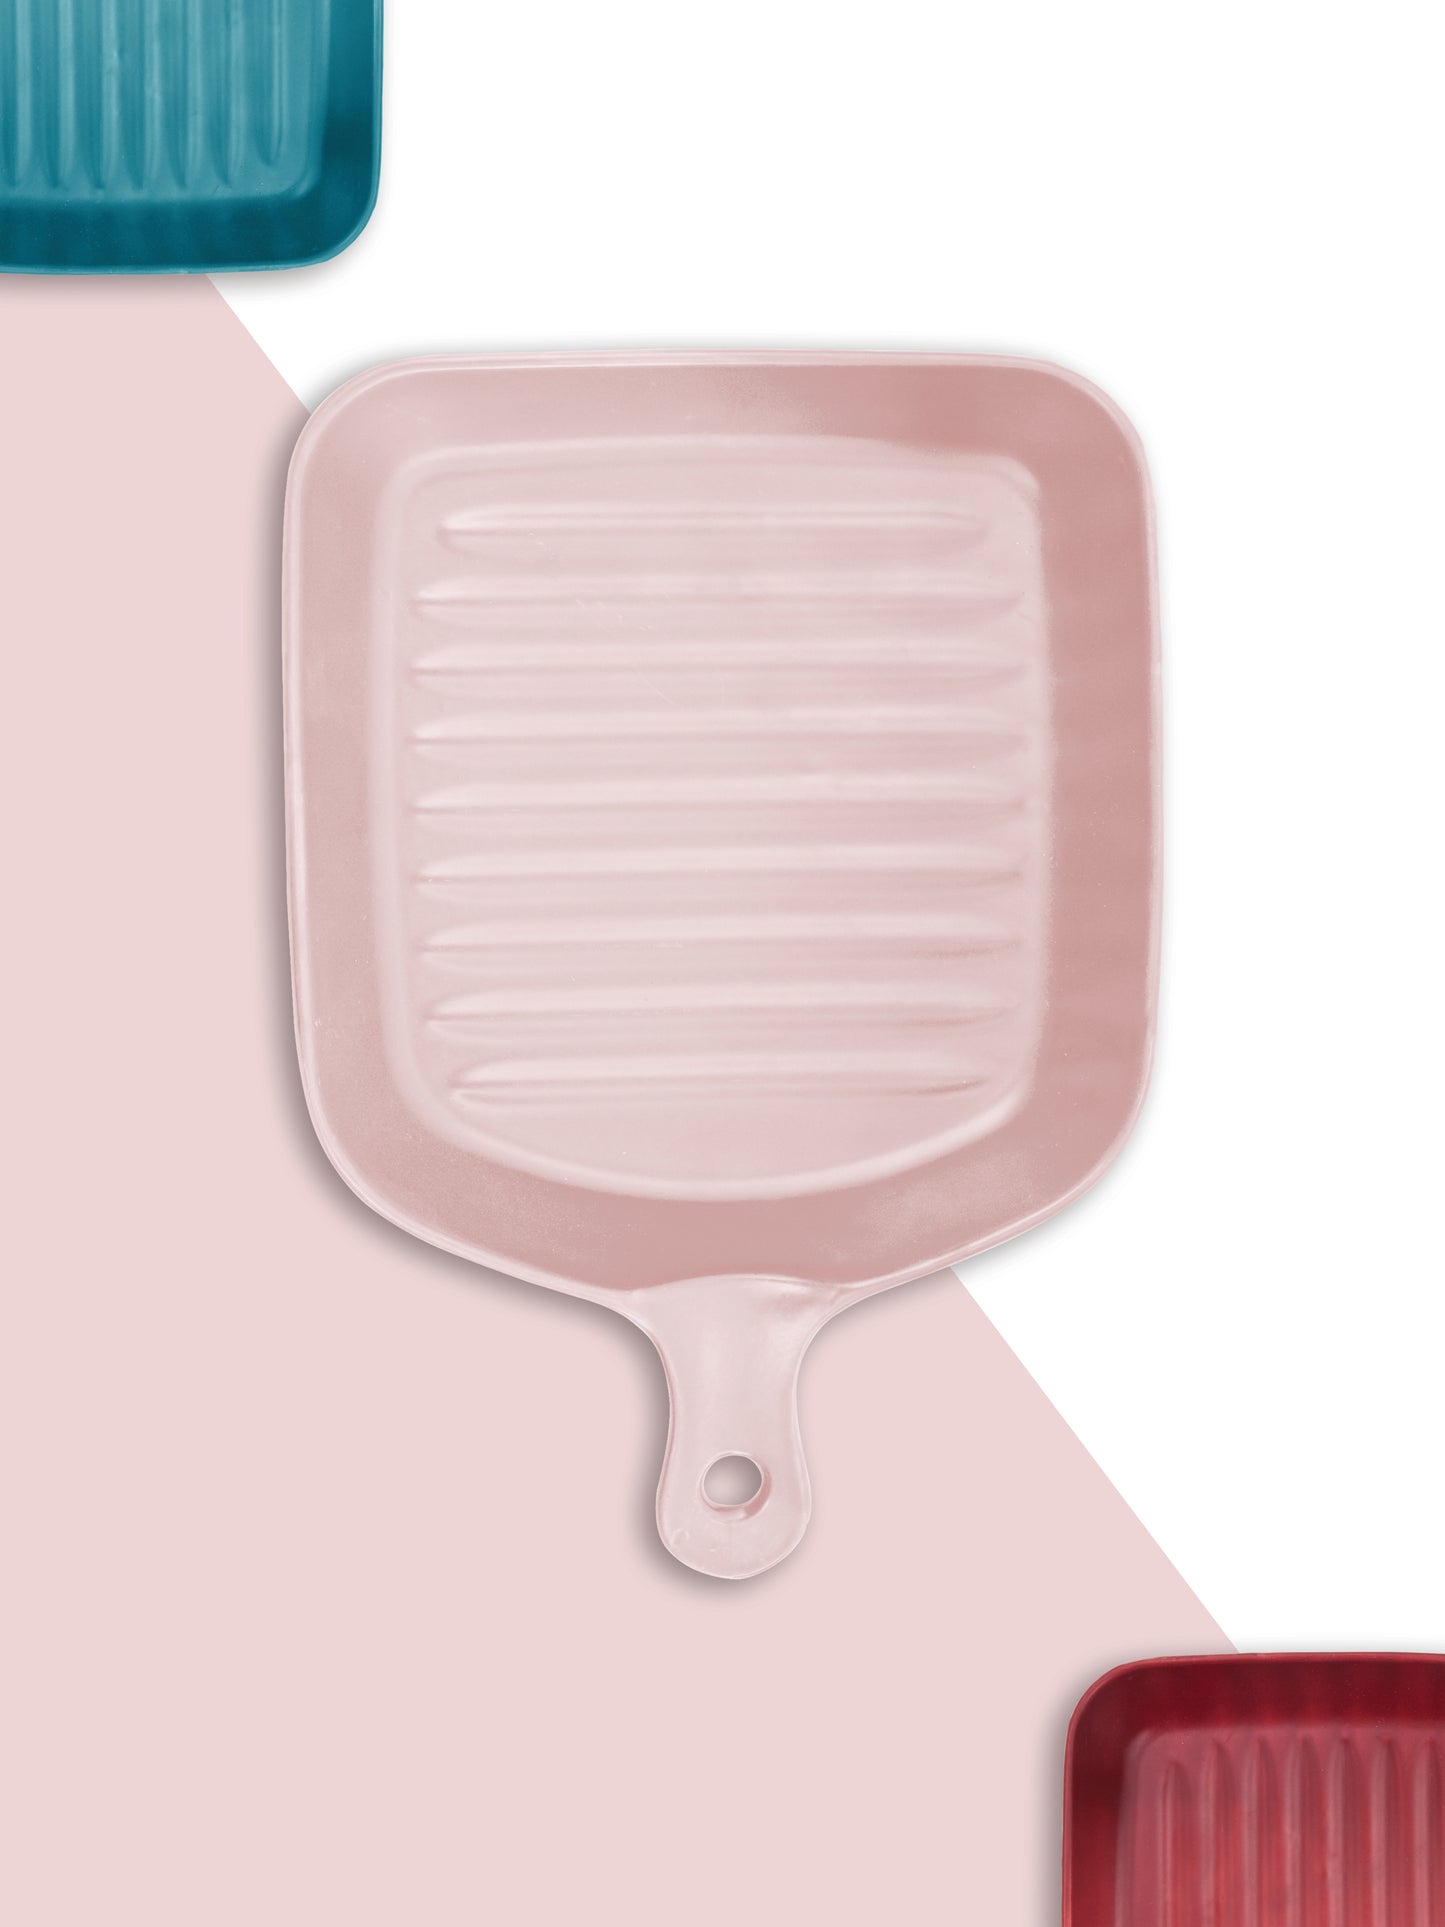 Ceramic Square Grill Plates for Serving, Pink